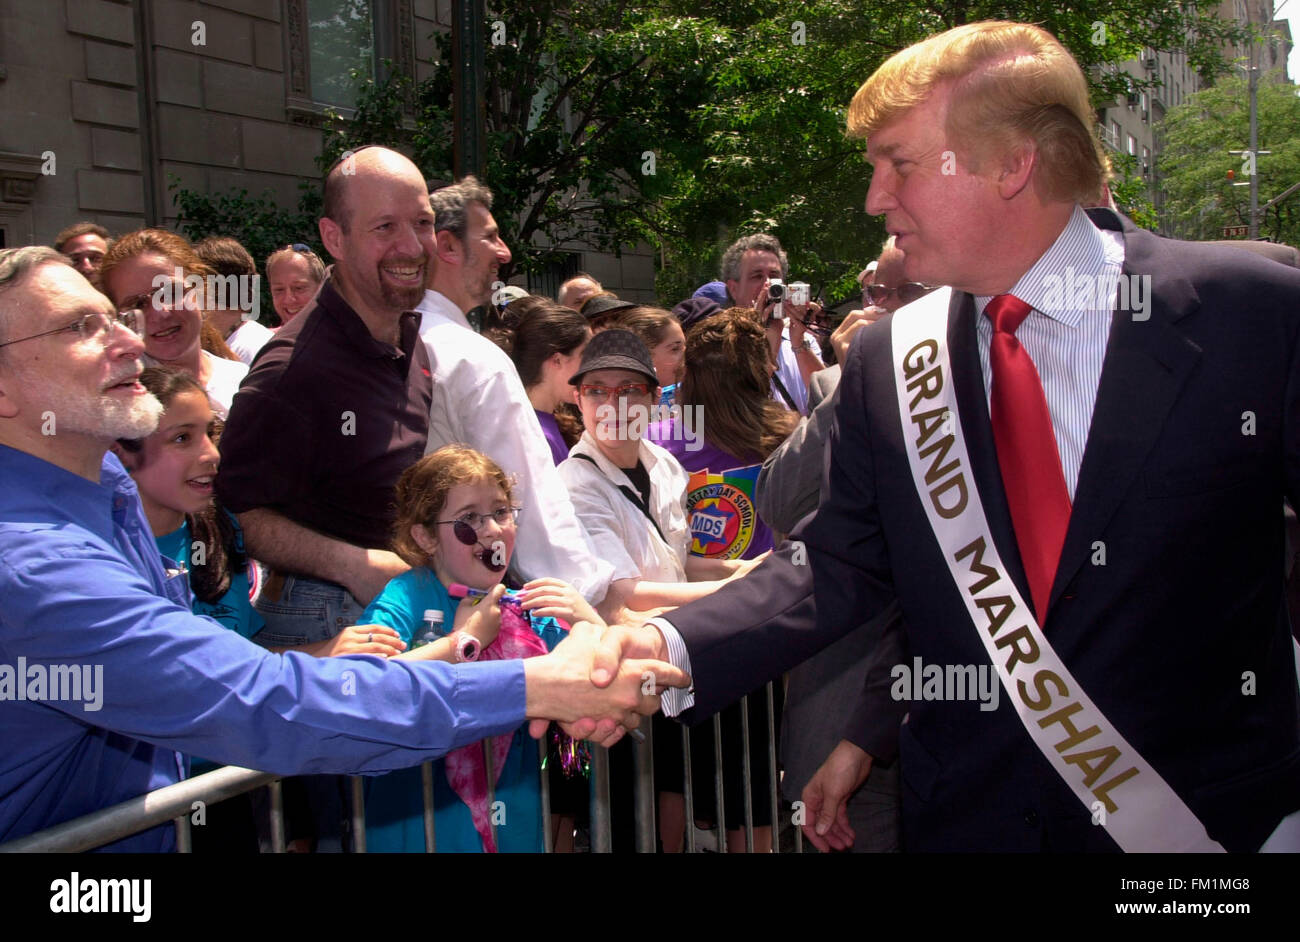 Real Estate mogul Donald Trump greets fans on May 23, 2004 as he marches as Grand Marshal in the 40th annual Salute to Israel Parade on Fifth Ave. The theme of this year's parade was visiting Israel, an effort to revive the sagging economy in the country due to the ongoing Palestinian terrorism. (© Richard B. Levine) Stock Photo